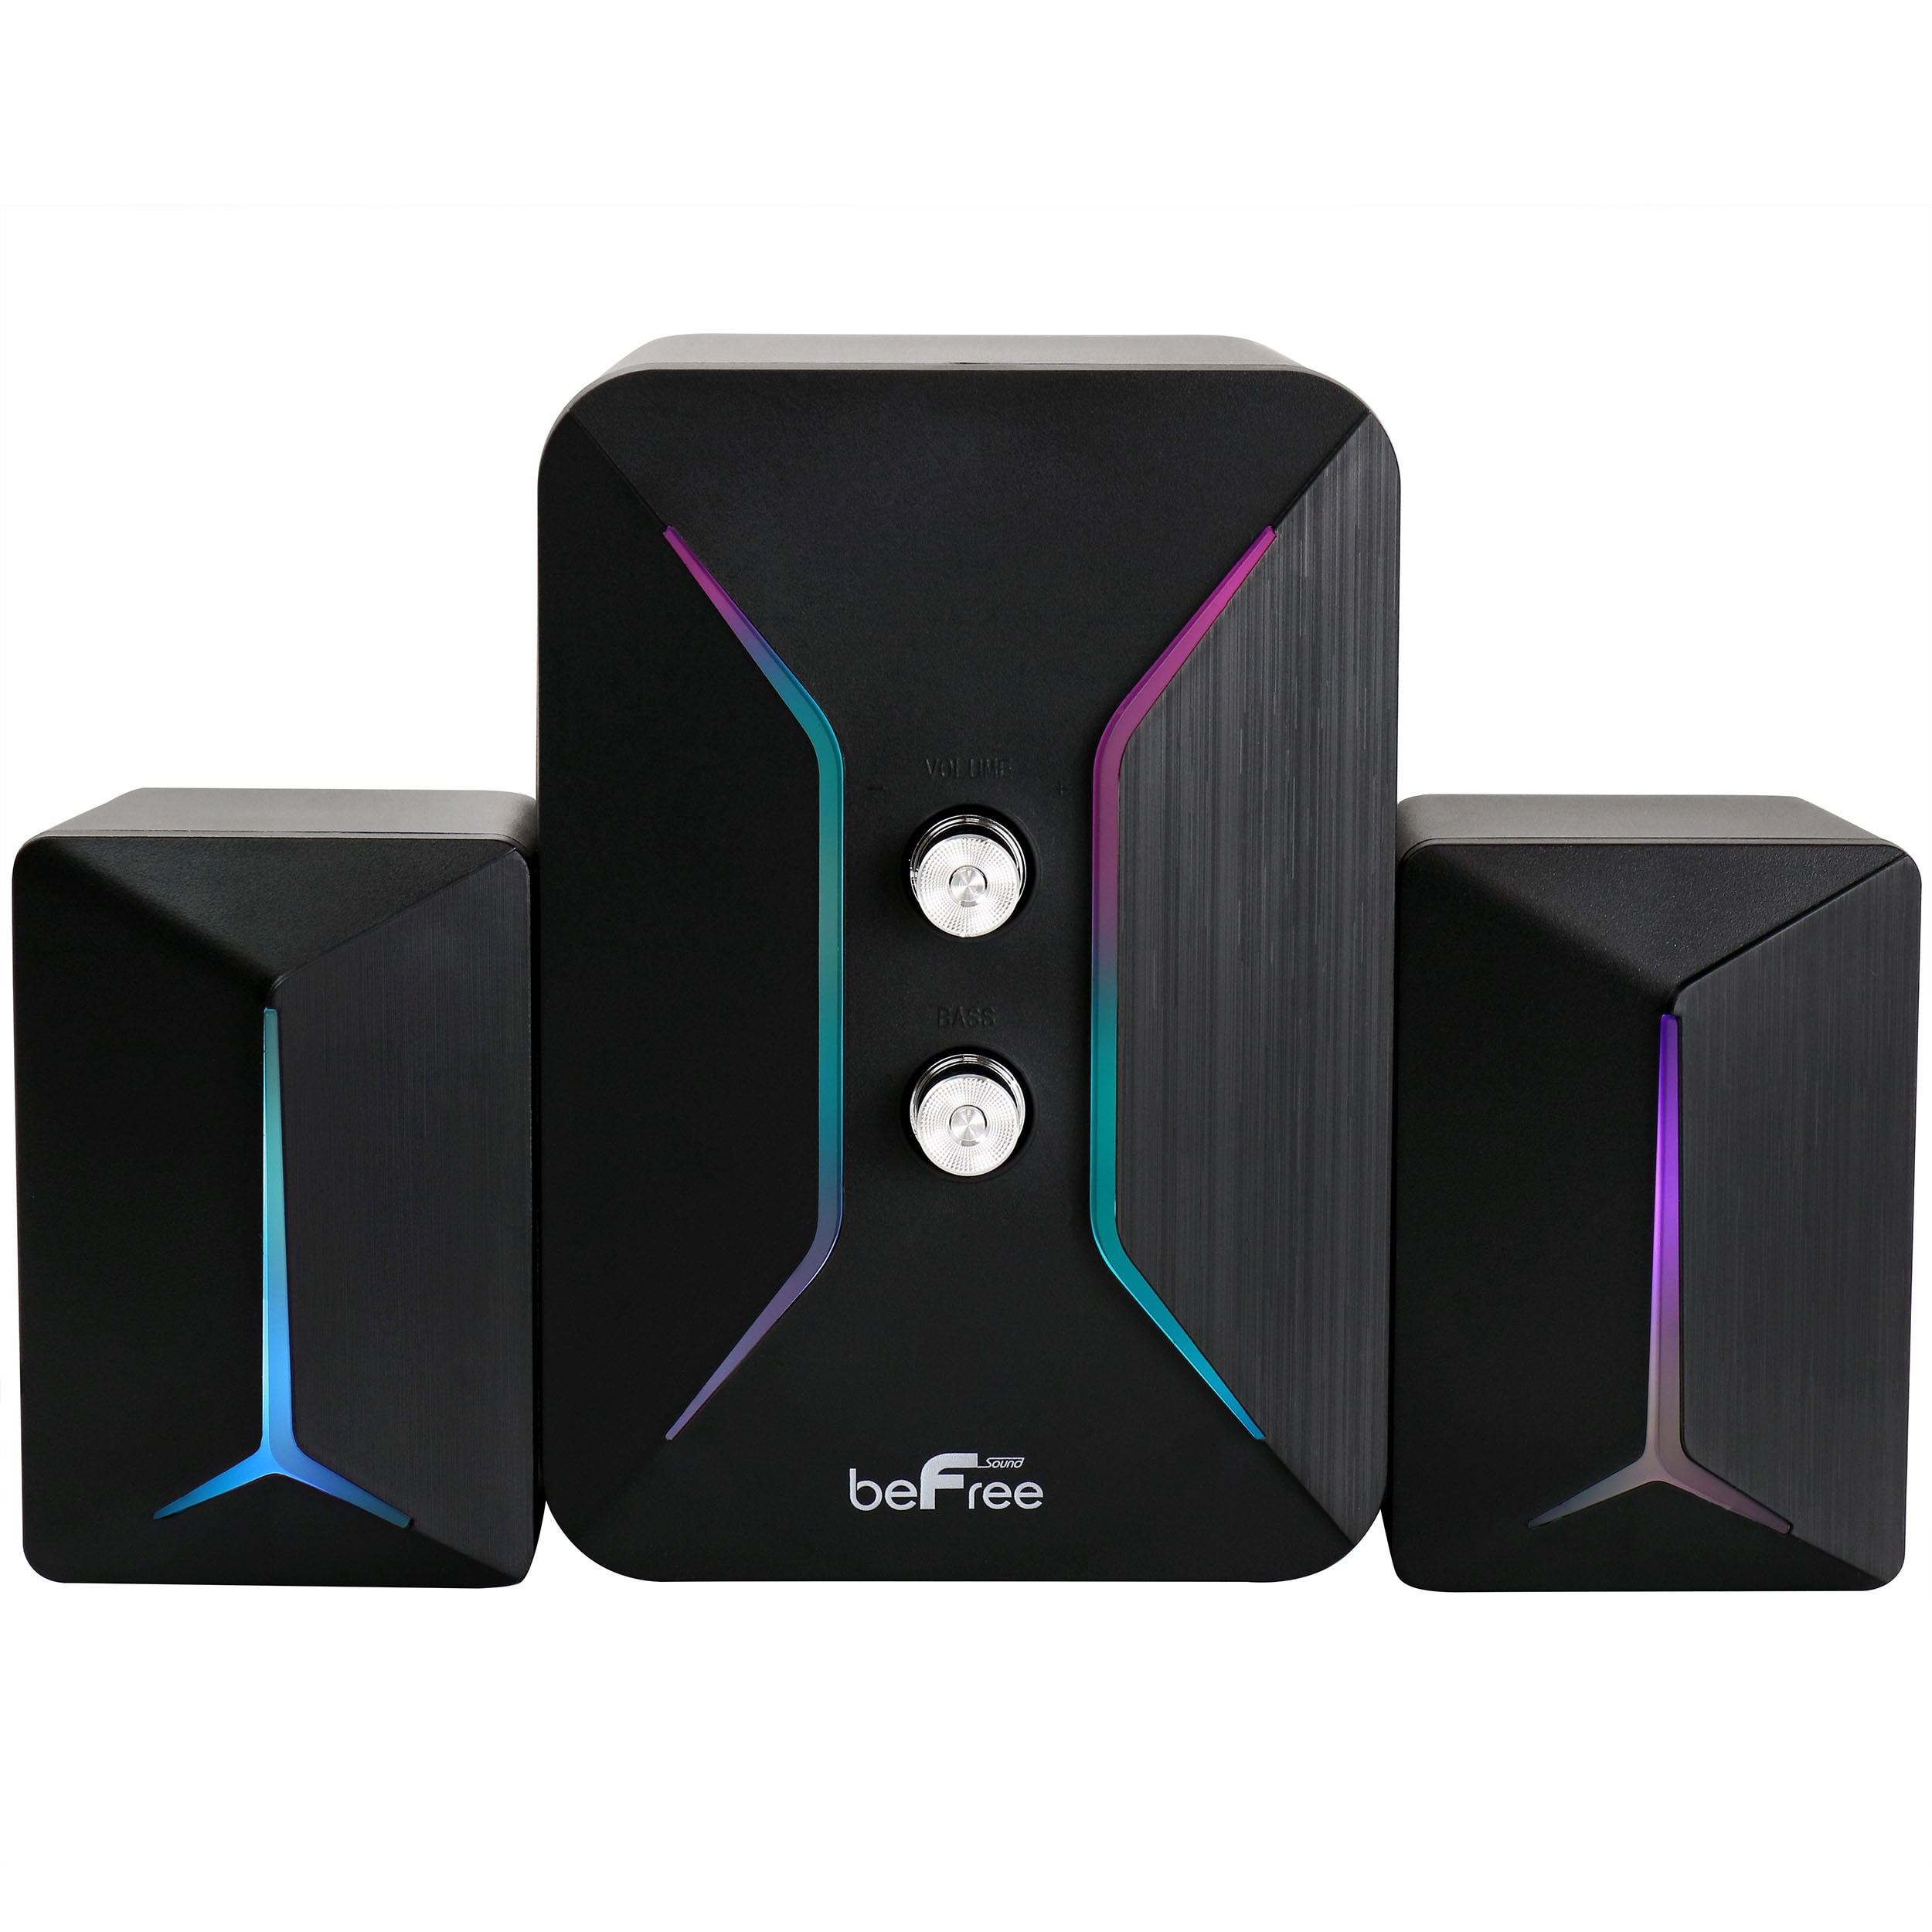 beFree Sound Computer Gaming 2.1 Speaker System with Color LED Lights - N/A